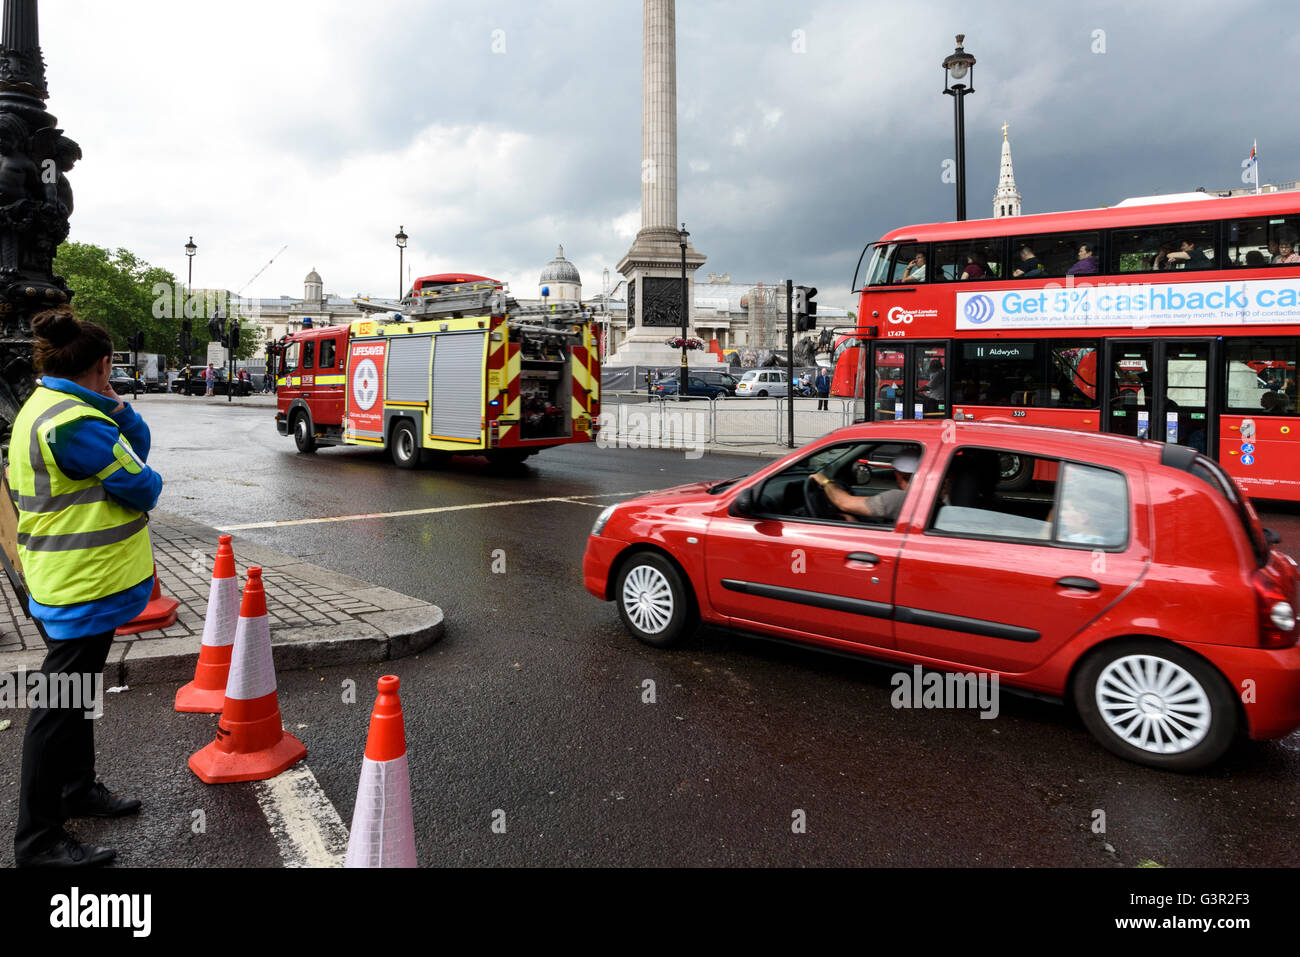 London fire engine, red double decker bus and red car at the Trafalgar Square roundabout, UK. Stock Photo